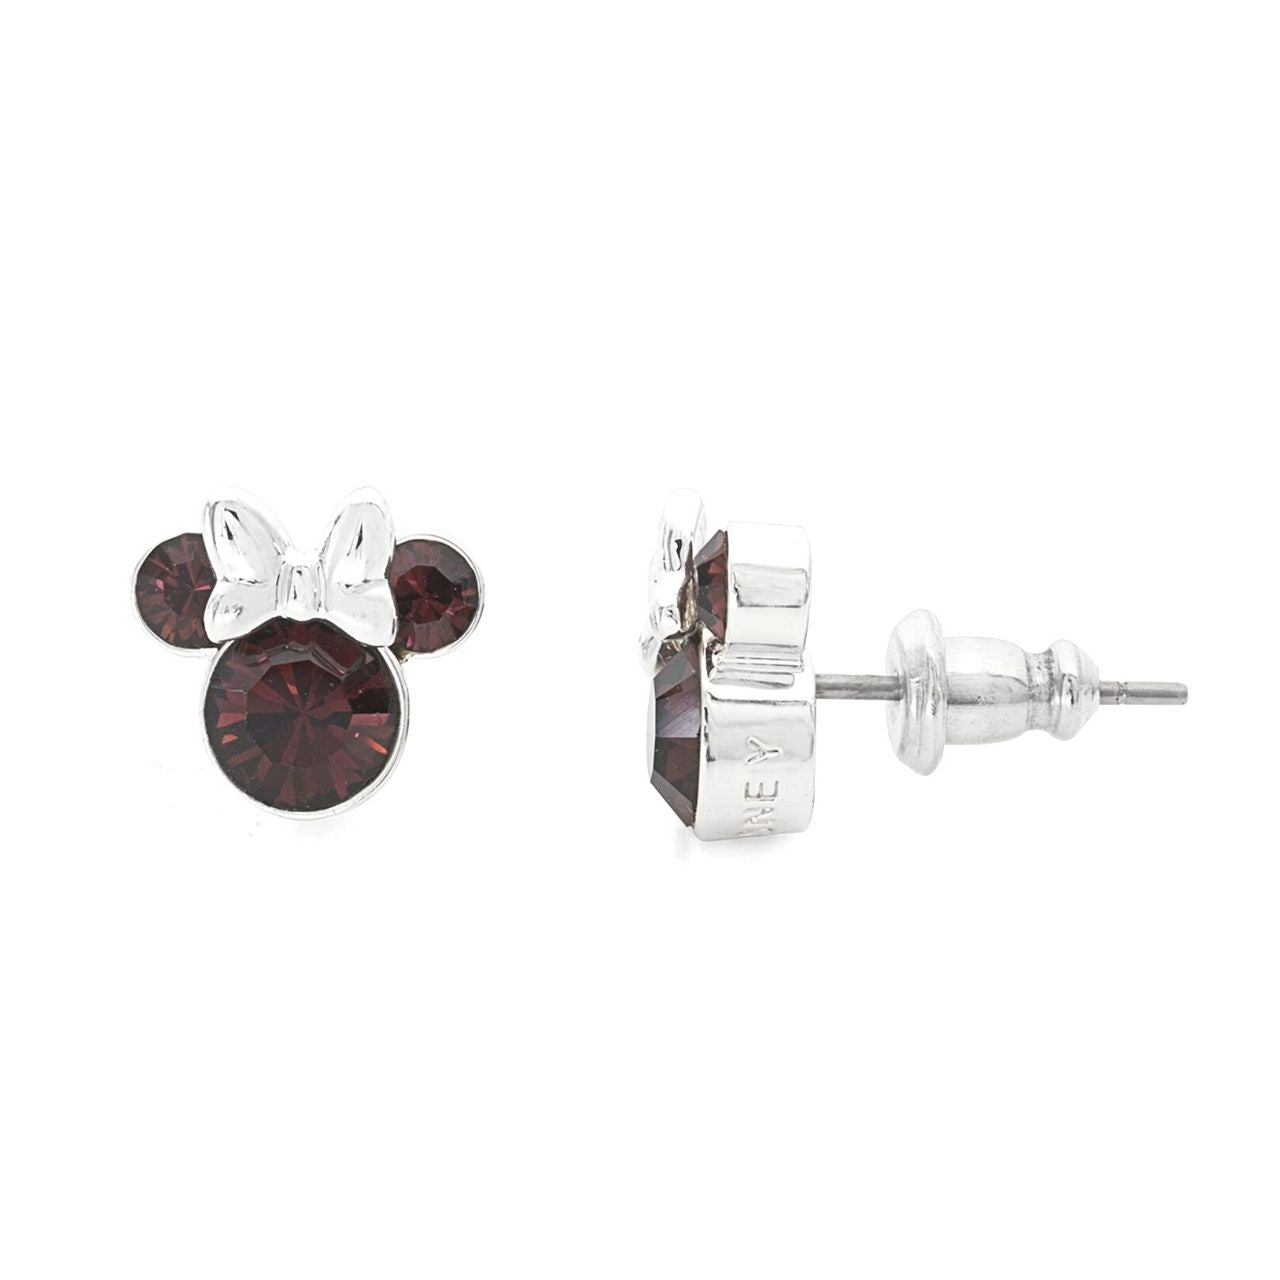 Disney Minnie Mouse Sterling Silver Birthstone Earrings Red  Red January Birthstone  Stunning silver Birthstone Earring form a silhouette of Minnie Mouse's with red CZ Crystals adding a feminine touch to the Disney classic piece of Jewellery.  Trendy and fashionable two tone design, the Disney Minnie Mouse Silhouette Sterling Silver earrings add a chic, fun touch to any outfit.